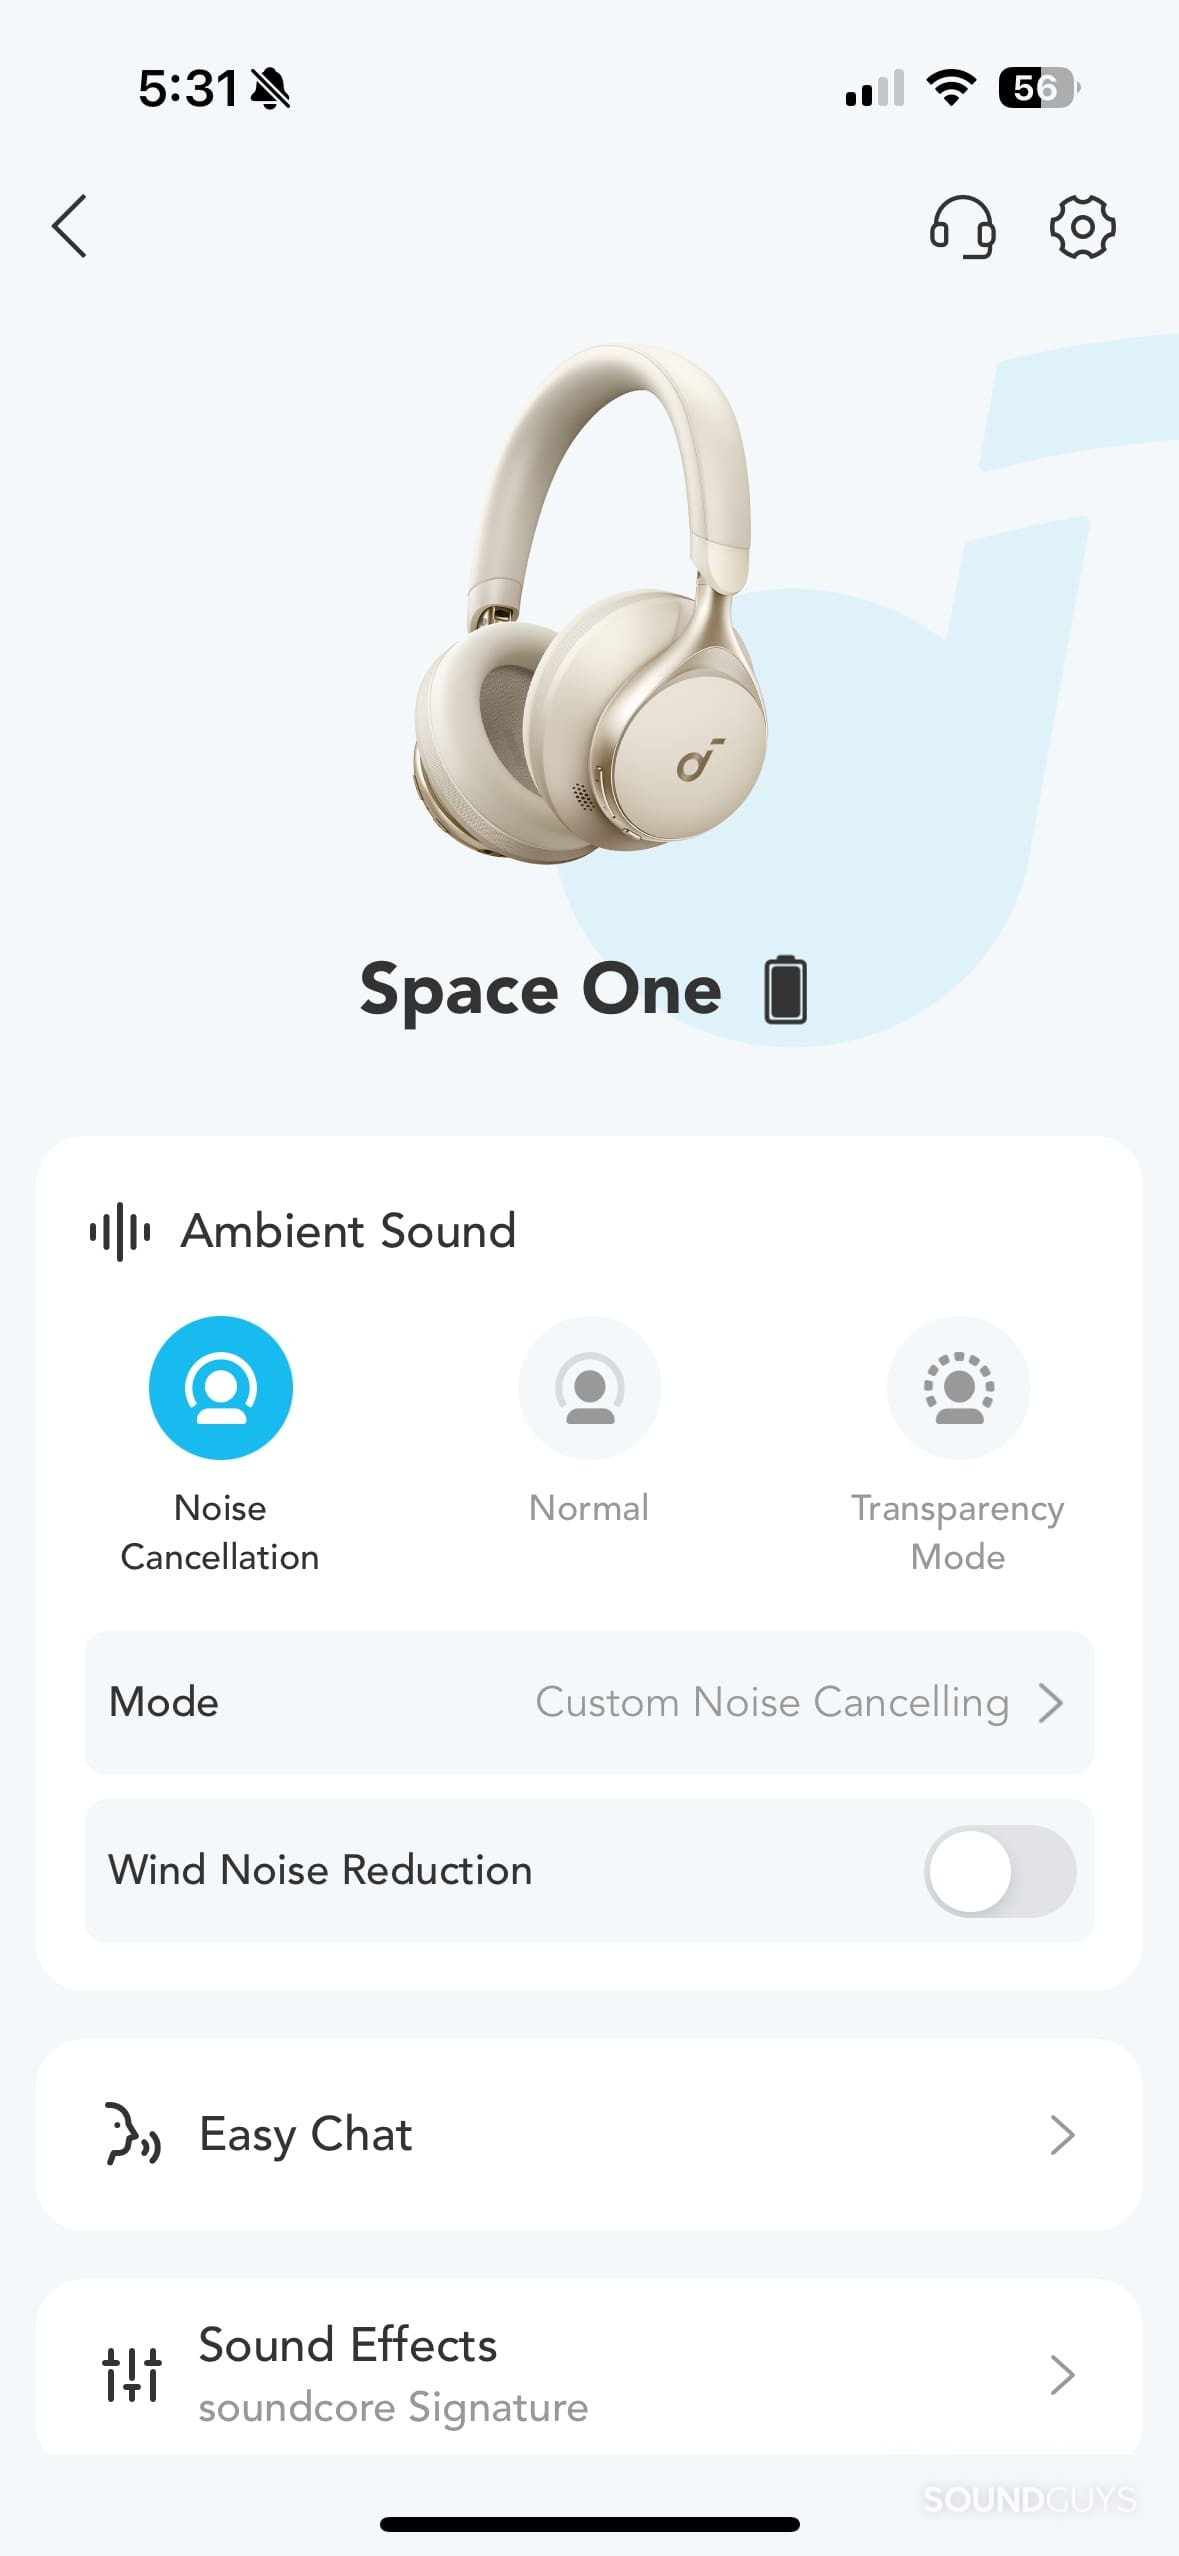 A screenshot of the Soundcore app home screen for the Space One headphones.